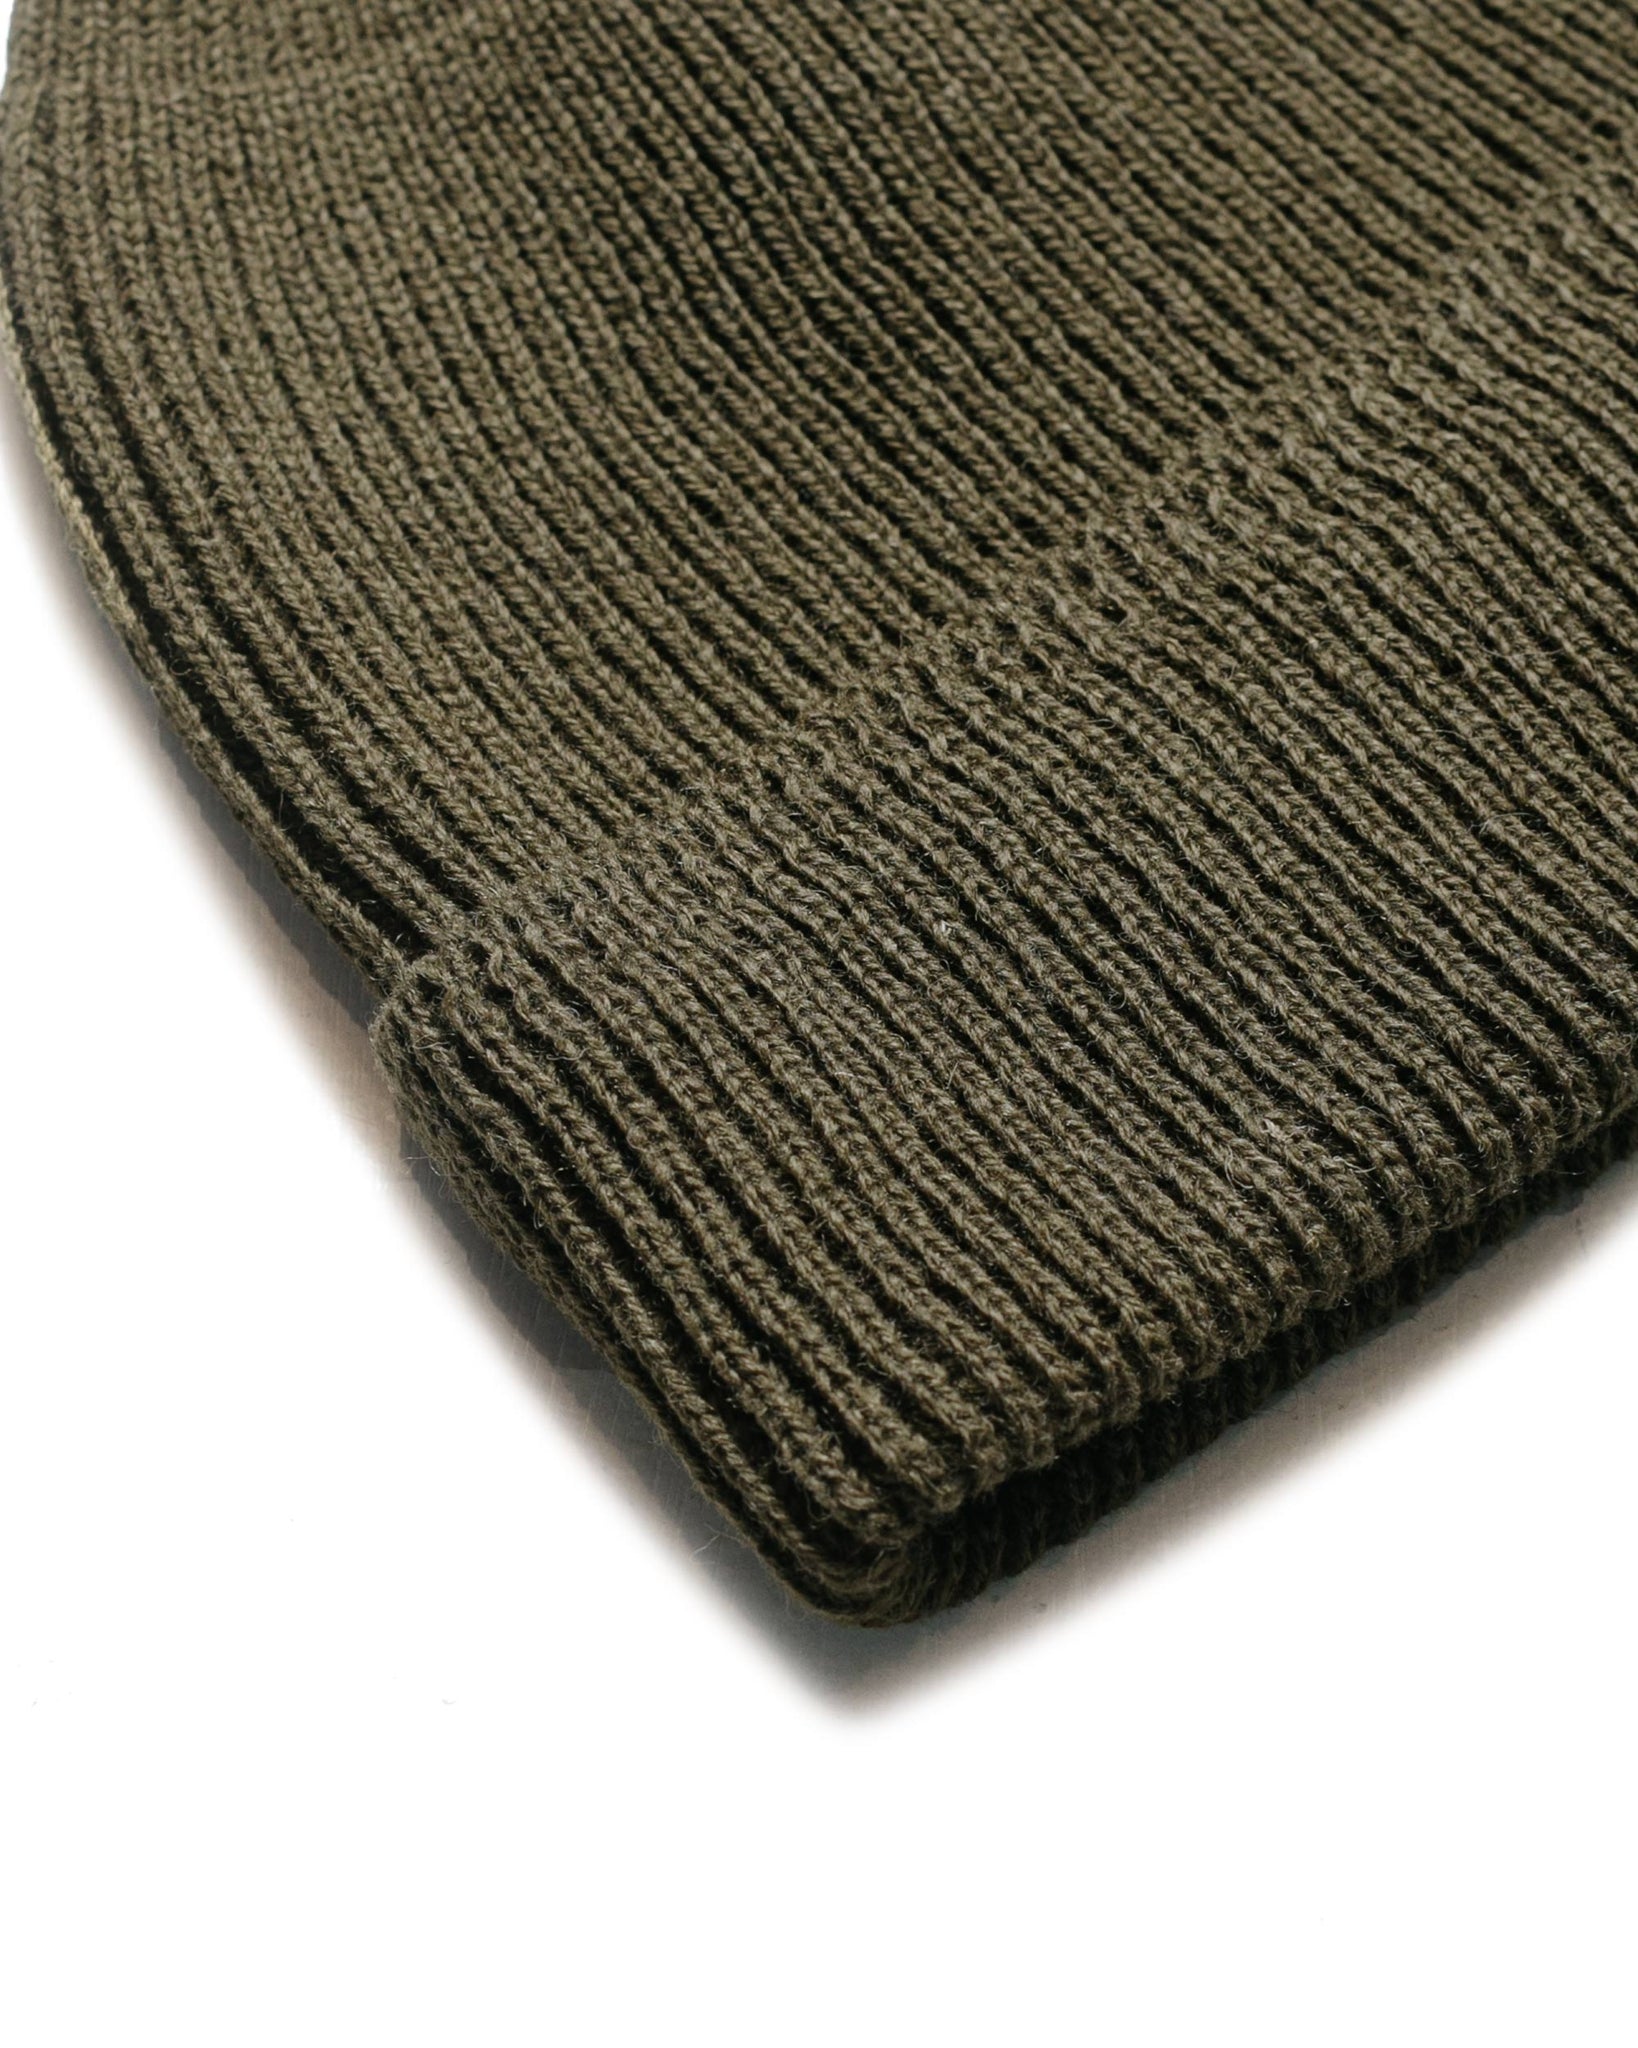 The Real McCoy's MA19103 U.S. Army A-4 Knit Cap Olive fabric